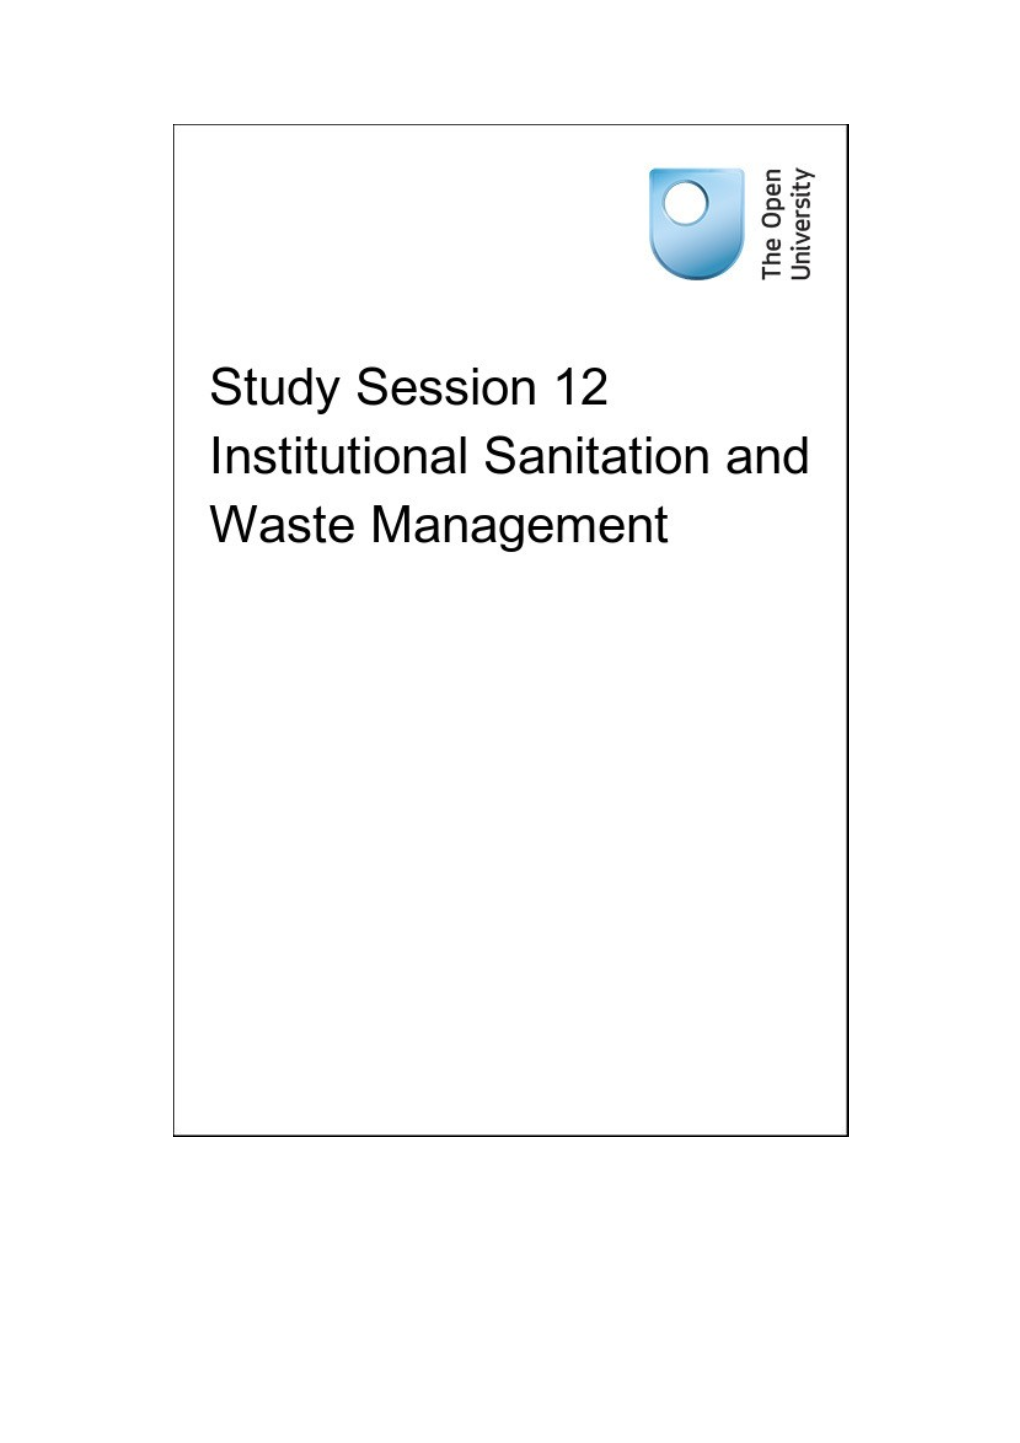 Study Session 12 Institutional Sanitation and Waste Management